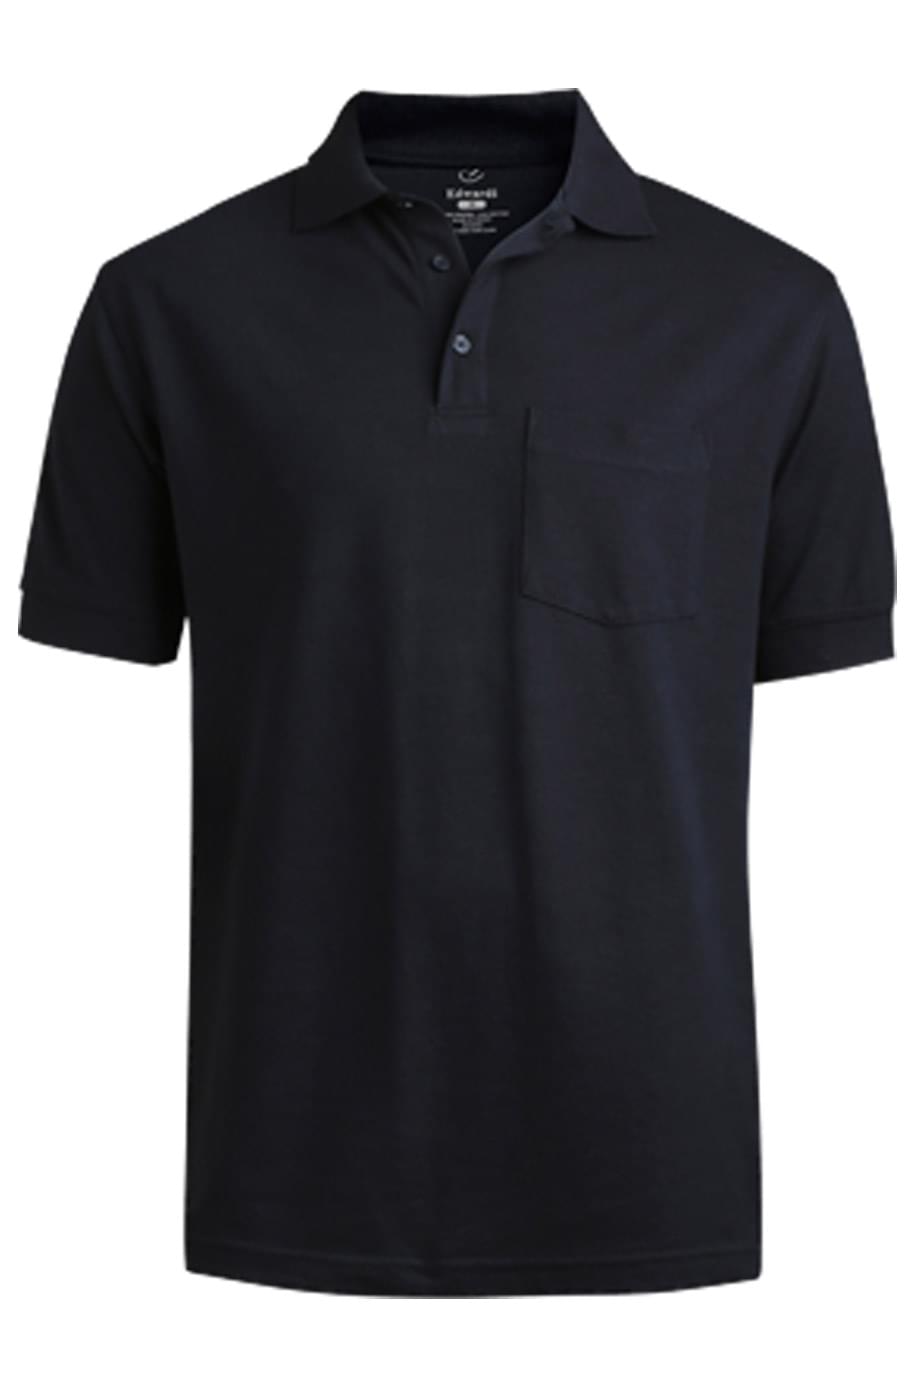 Edwards Garment 1505 - Soft Touch Short Sleeve Pique Polo With Pocket